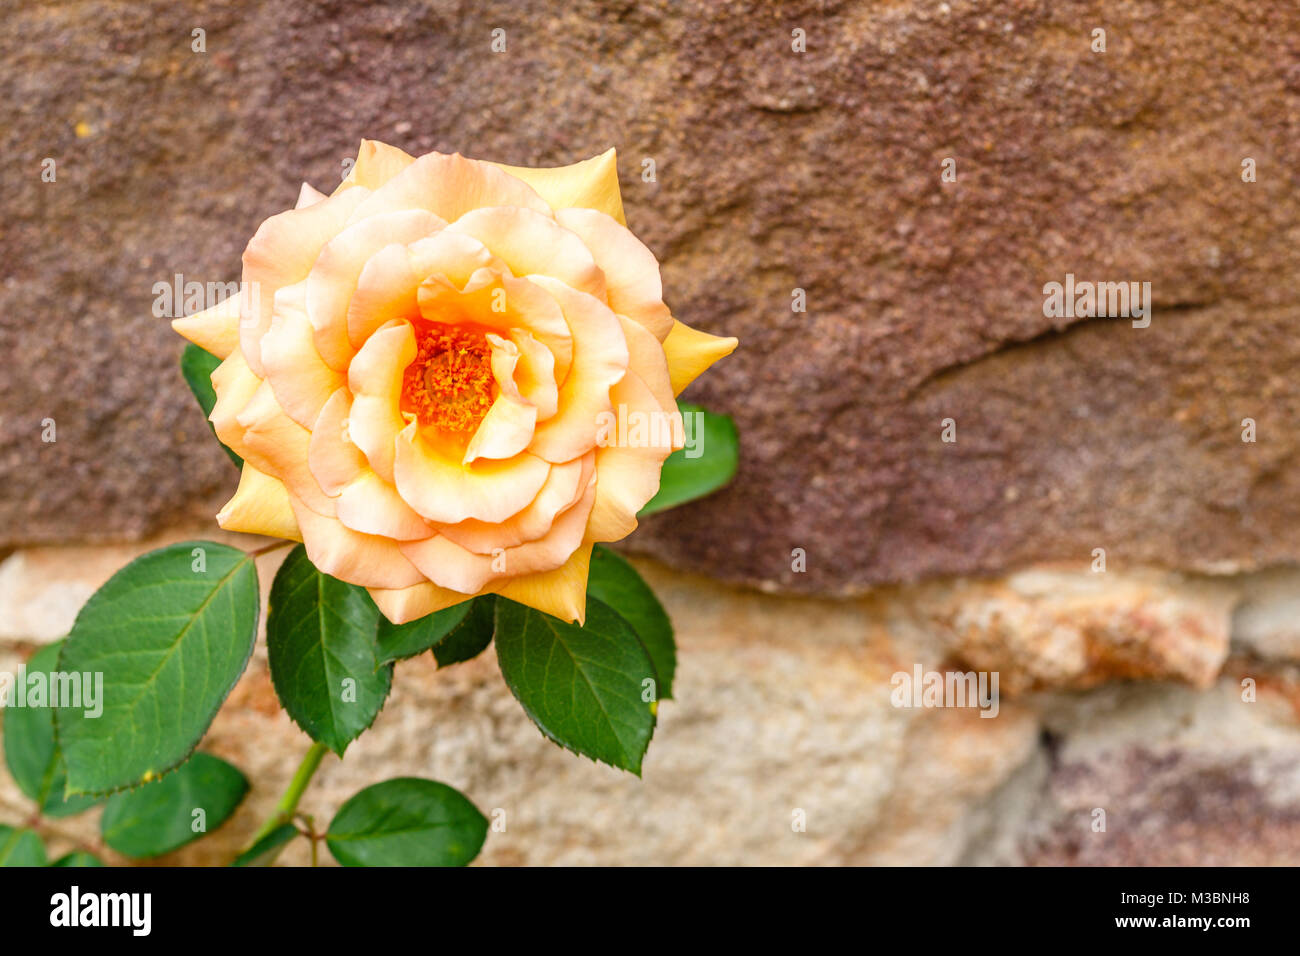 Blooming rose  with a stone background. Queensland, Australia Stock Photo